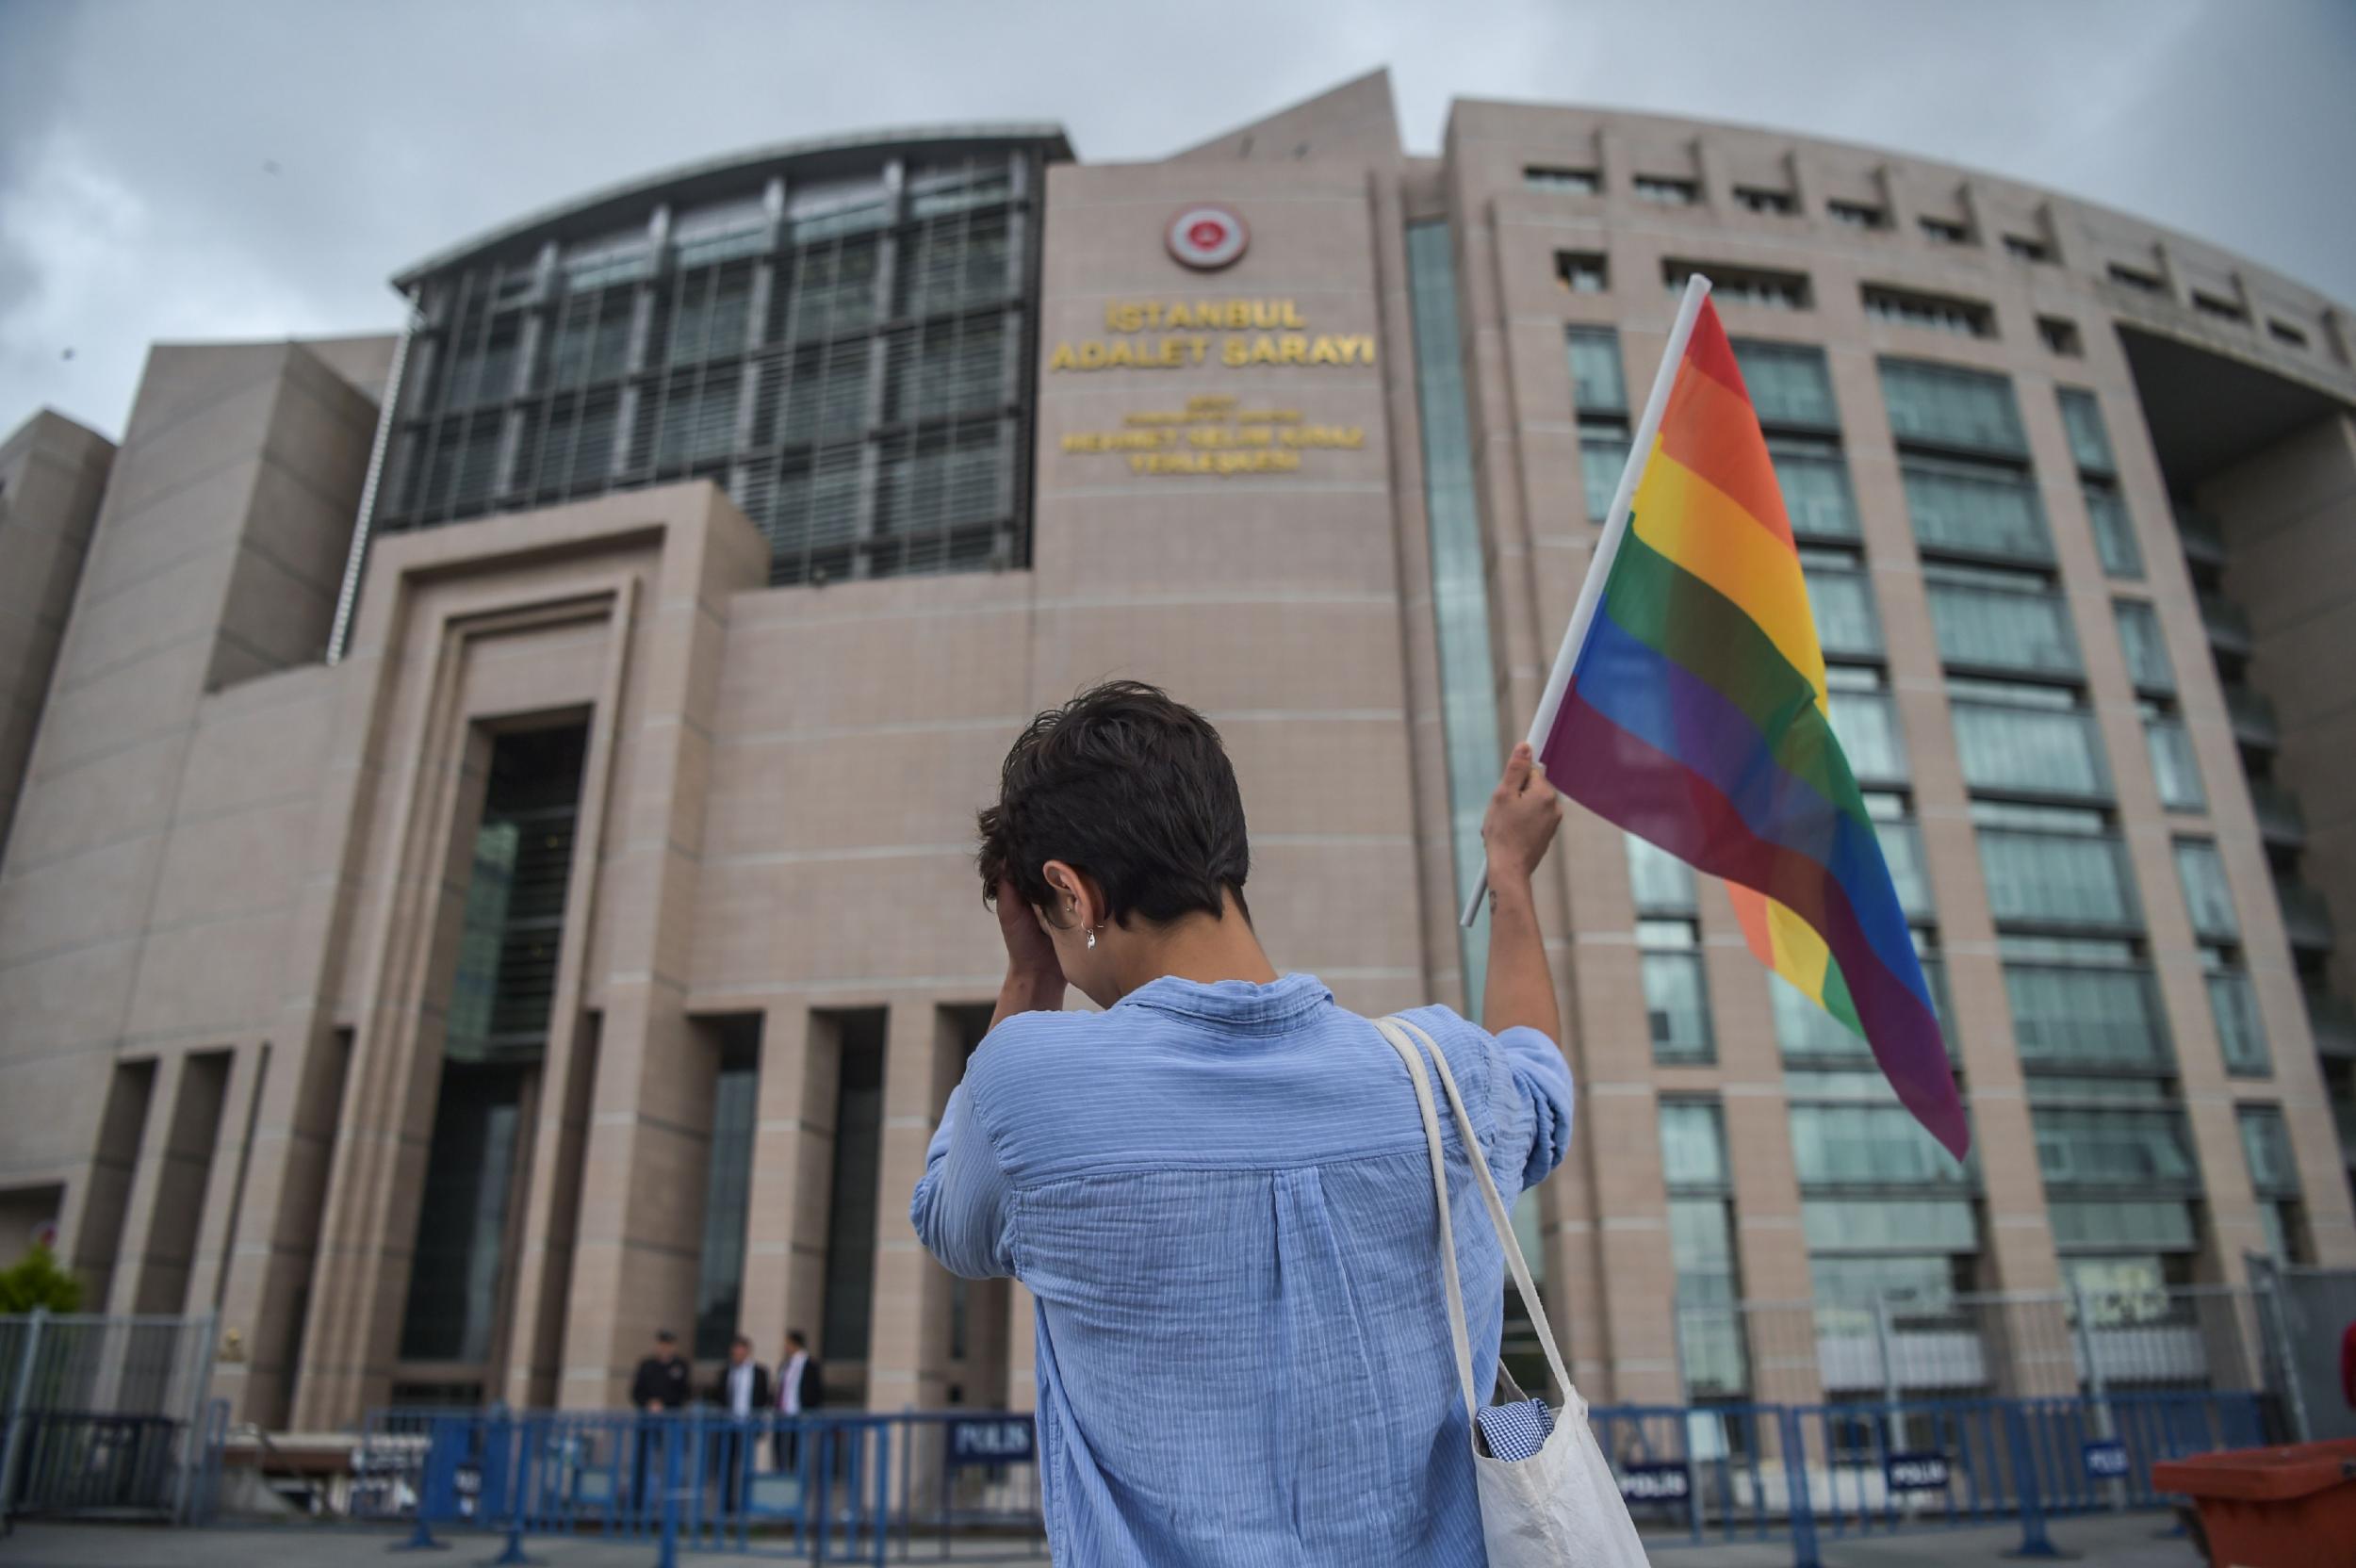 A person waves a rainbow flag in front of Istanbul courthouse in support of eleven LGBTI activists charged with attending last year's banned gay pride march